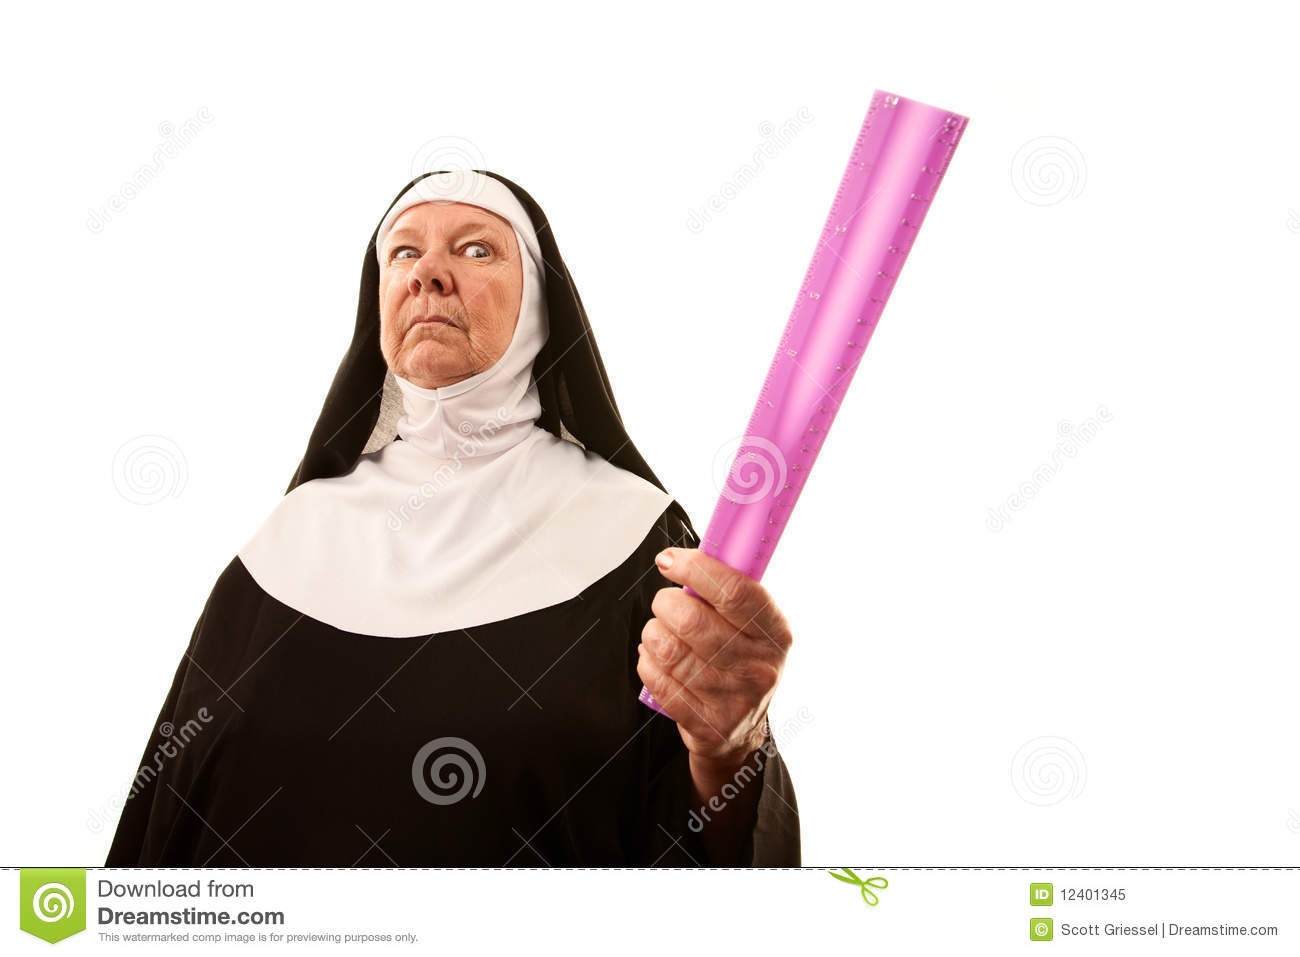 Angry Nun With Ruler Royalty Free Stock Photo   Image  12401345